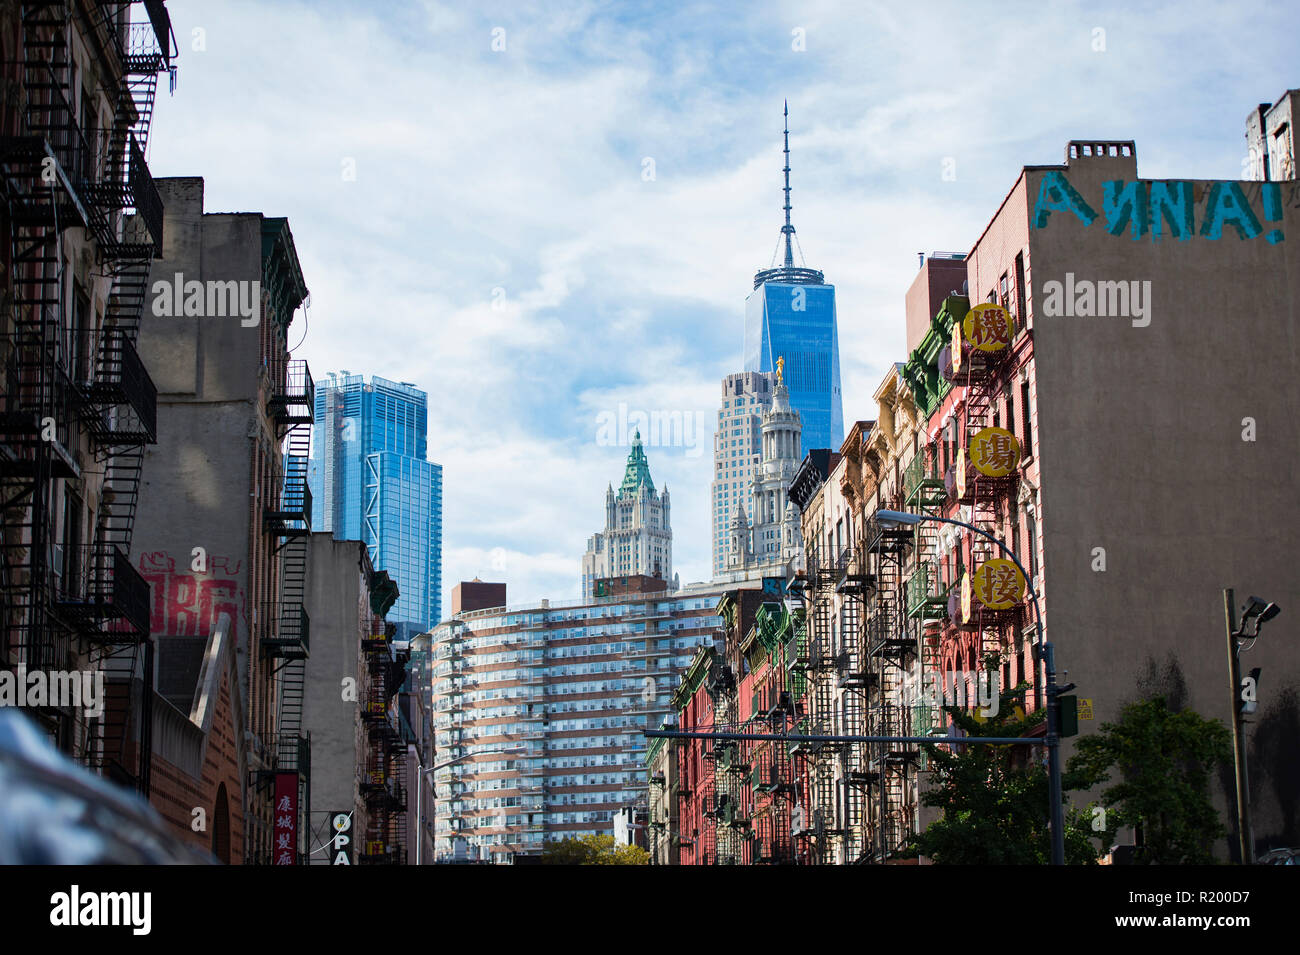 NEW YORK - USA- 28 OCTOBER 2018. Close-up view of New York City style apartment buildings with emergency stairs along Mott Street in Chinatown. Stock Photo